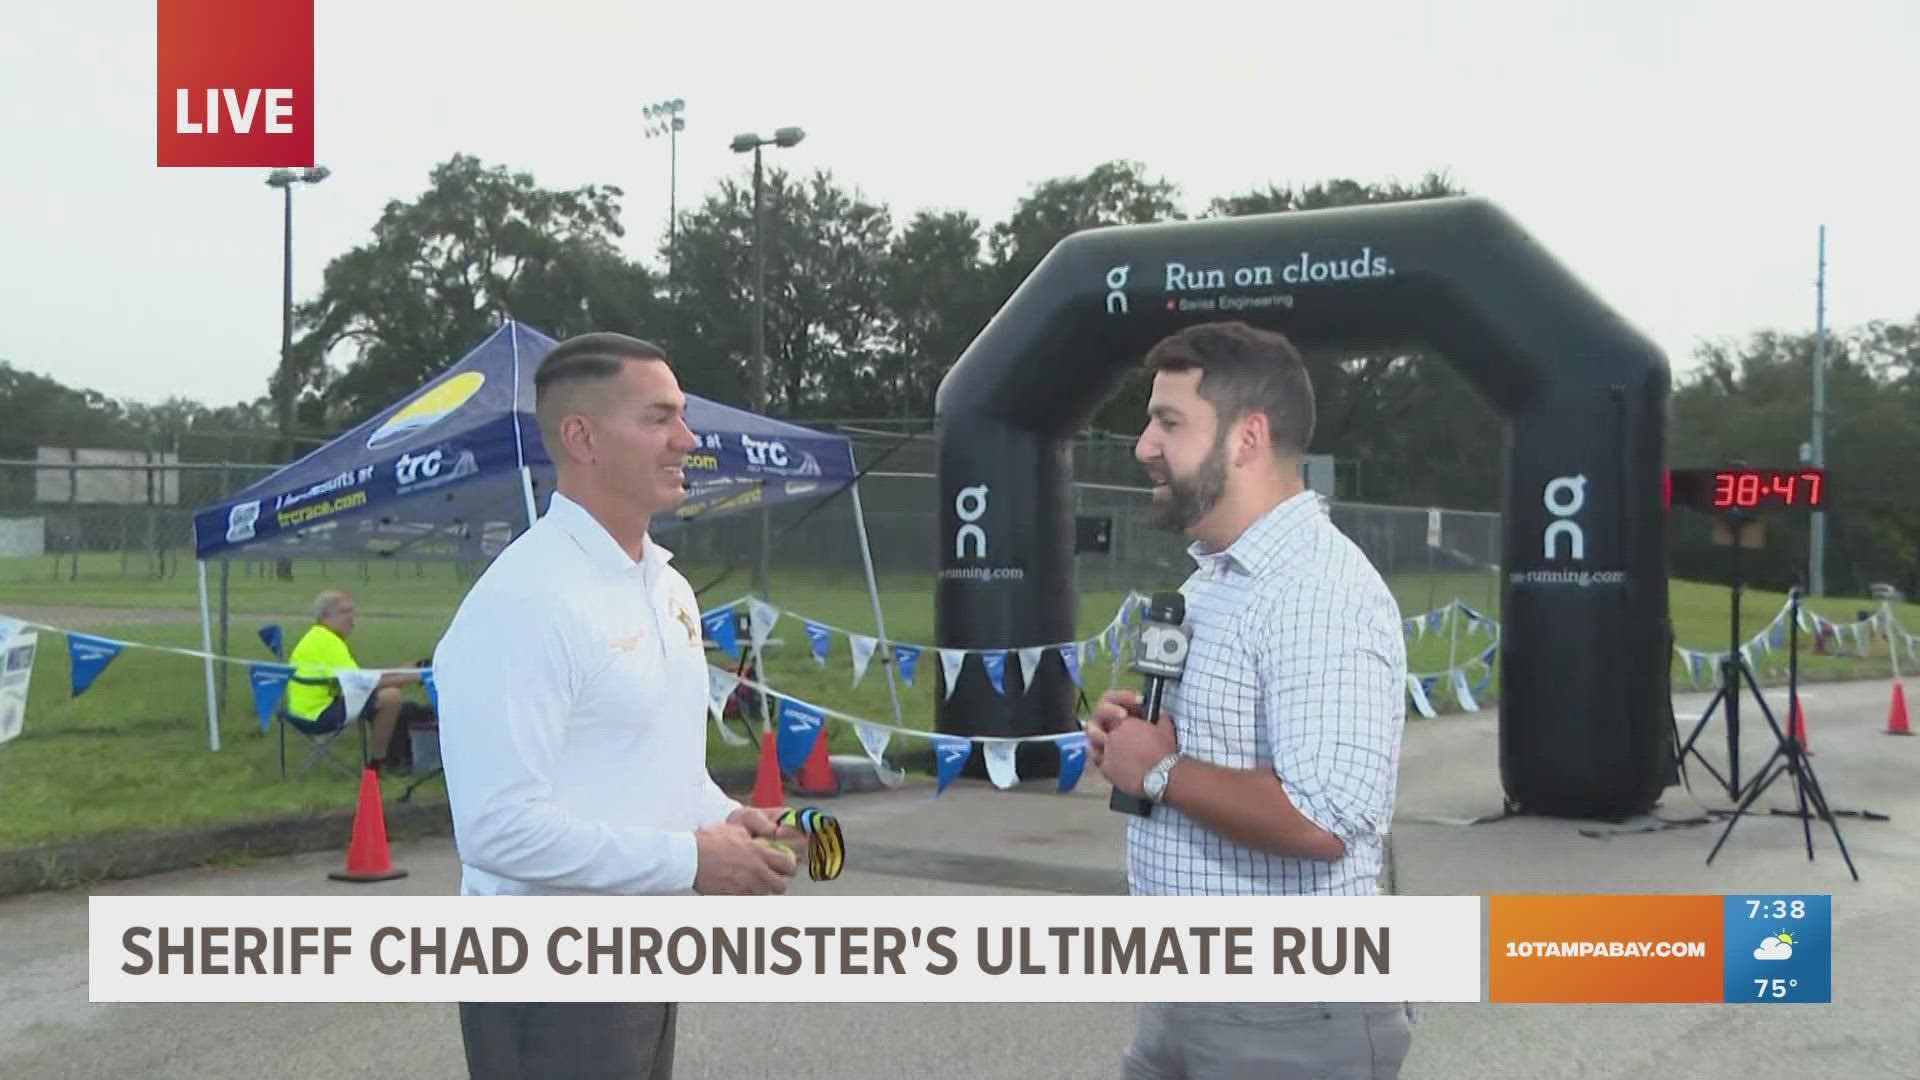 "Sheriff Chad Chronister’s Ultimate Run" kicked off Saturday morning outside Temple Terrace Elementary School.